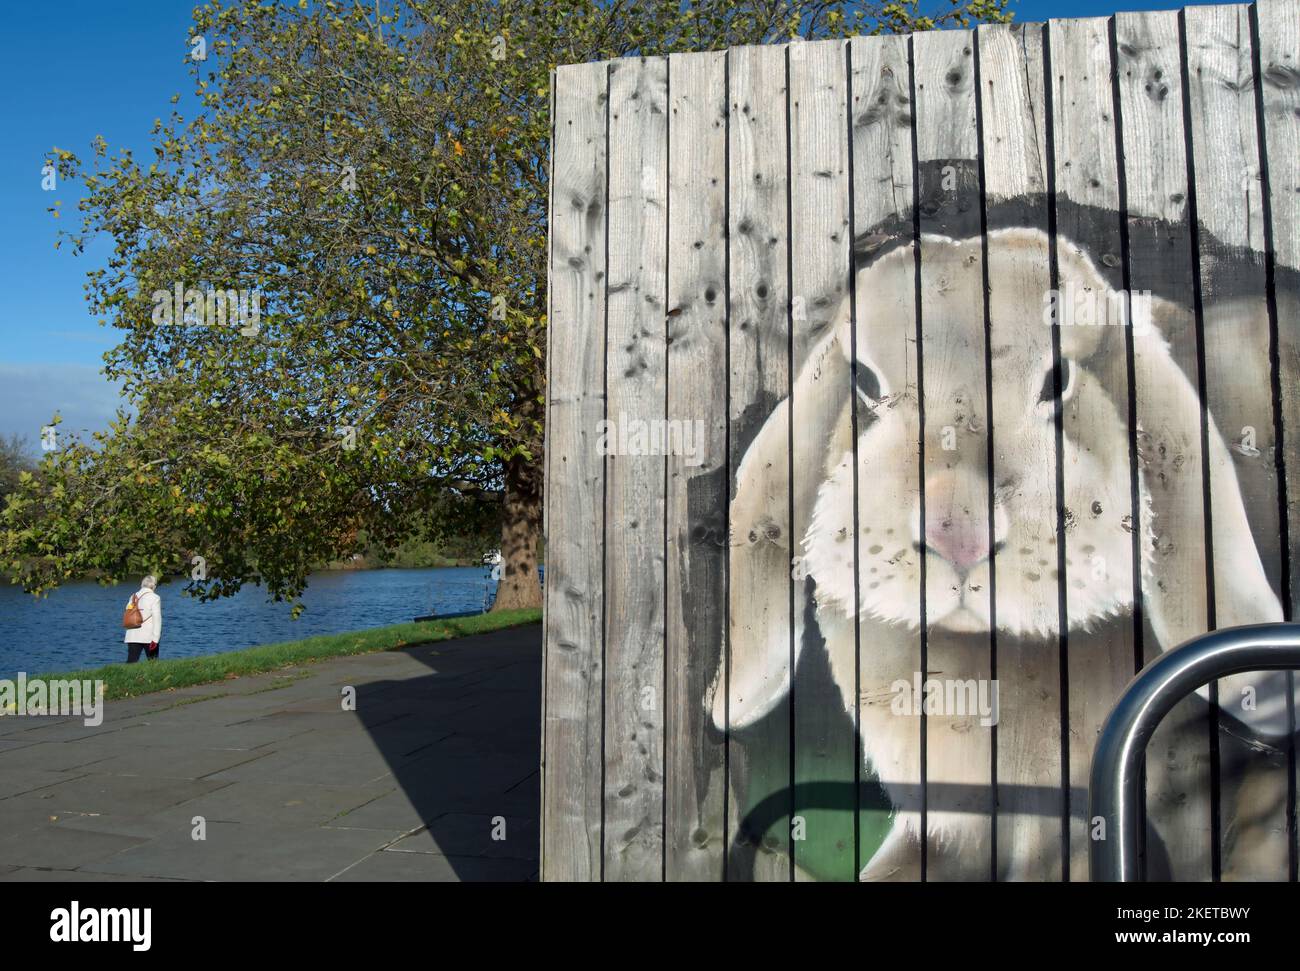 a large image of a rabbit on the side of a cafe dominates the riverside parth in kingston upon thames, surrey, england Stock Photo